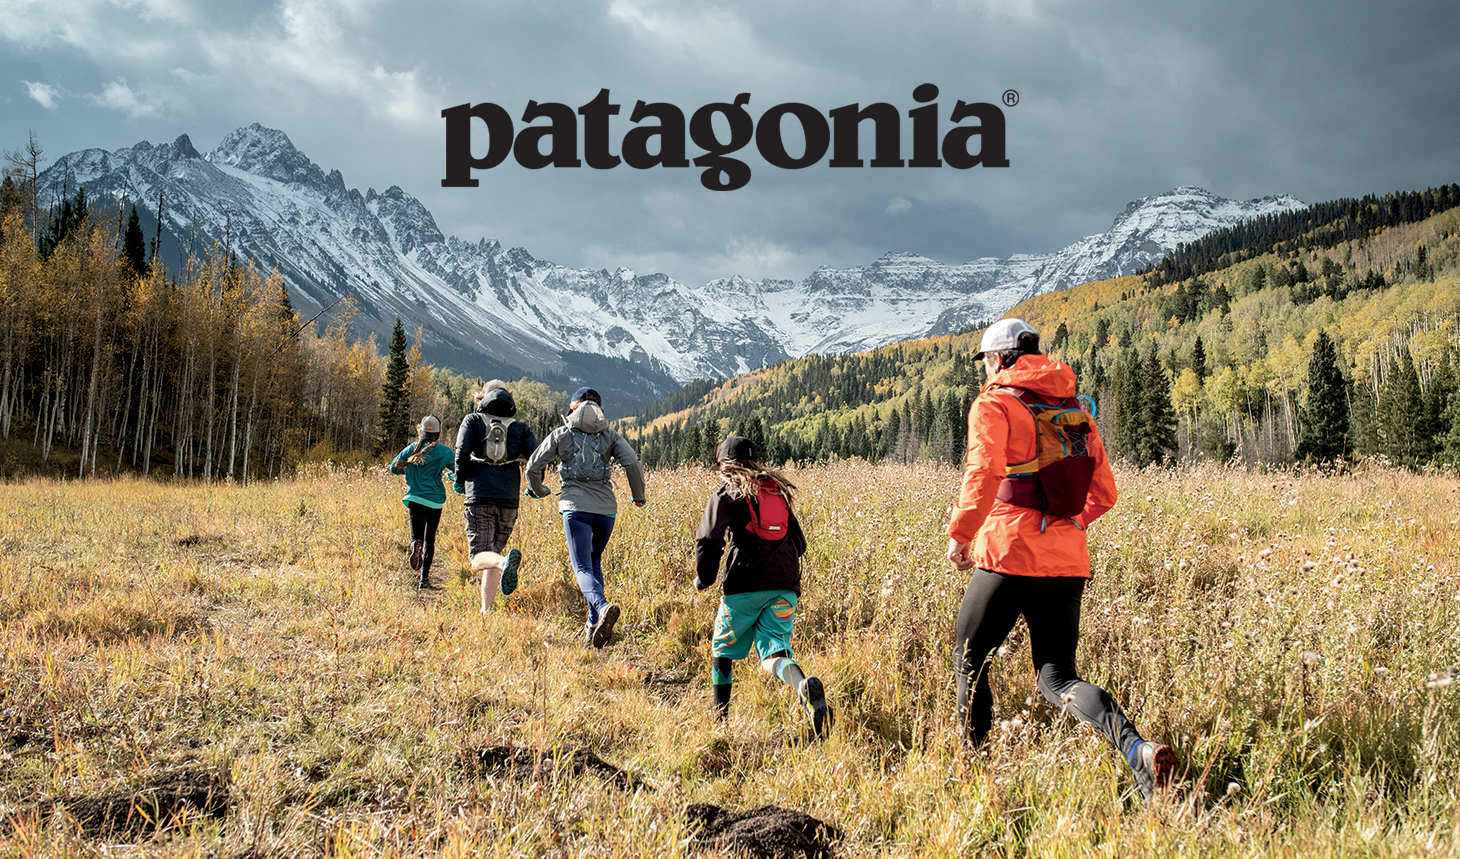 people wearing patagonia gear running through a field with mountains and trees in the background. Patagonia logo is on top of the image.